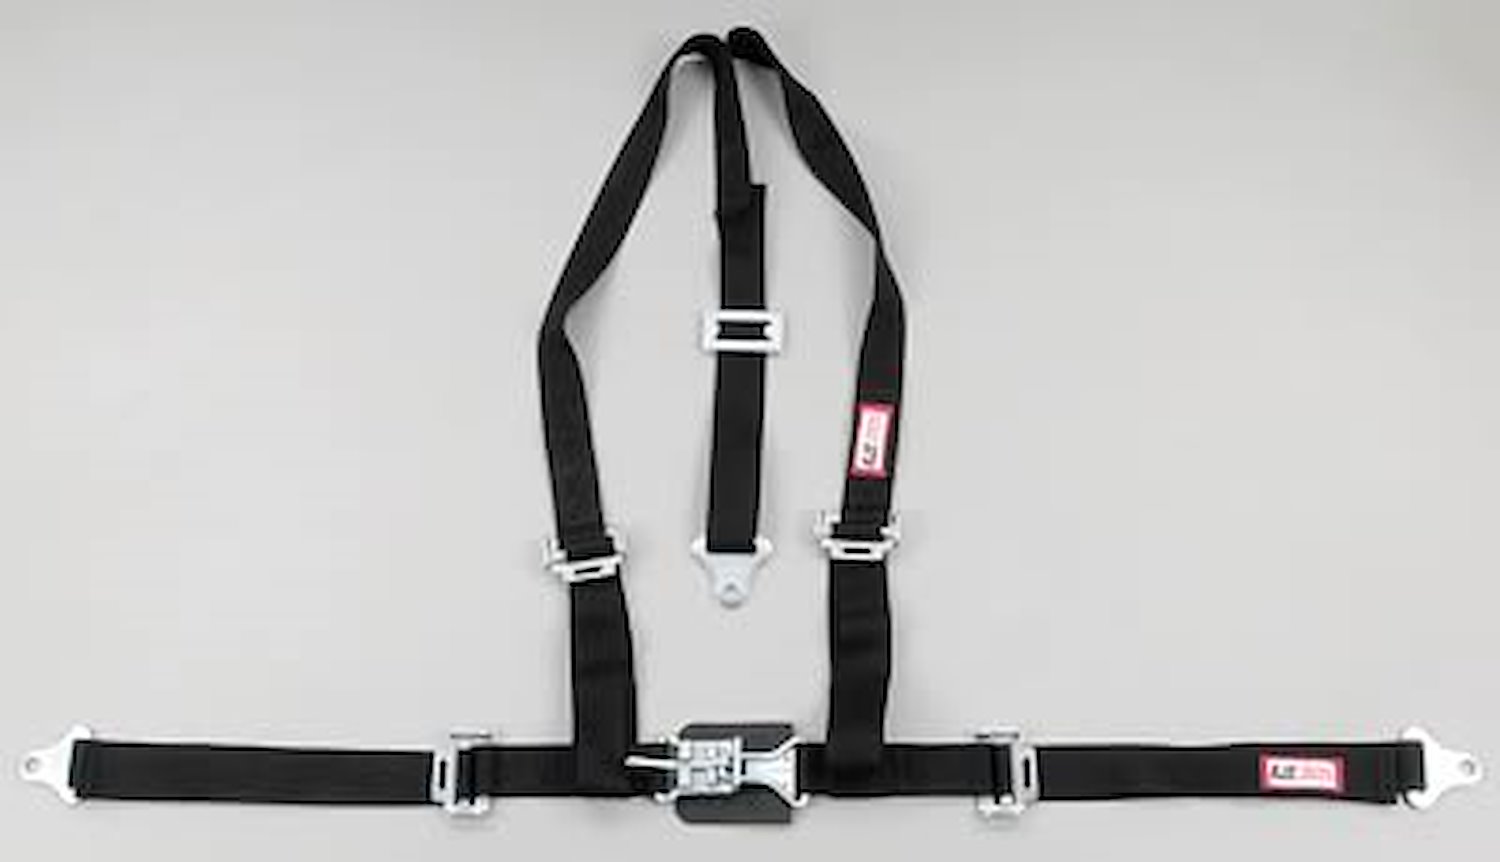 NON-SFI L&L HARNESS 3 PULL DOWN Lap Belt SEWN IN 2 Shoulder Harness V ROLL BAR Mount ALL SNAP ENDS YELLOW